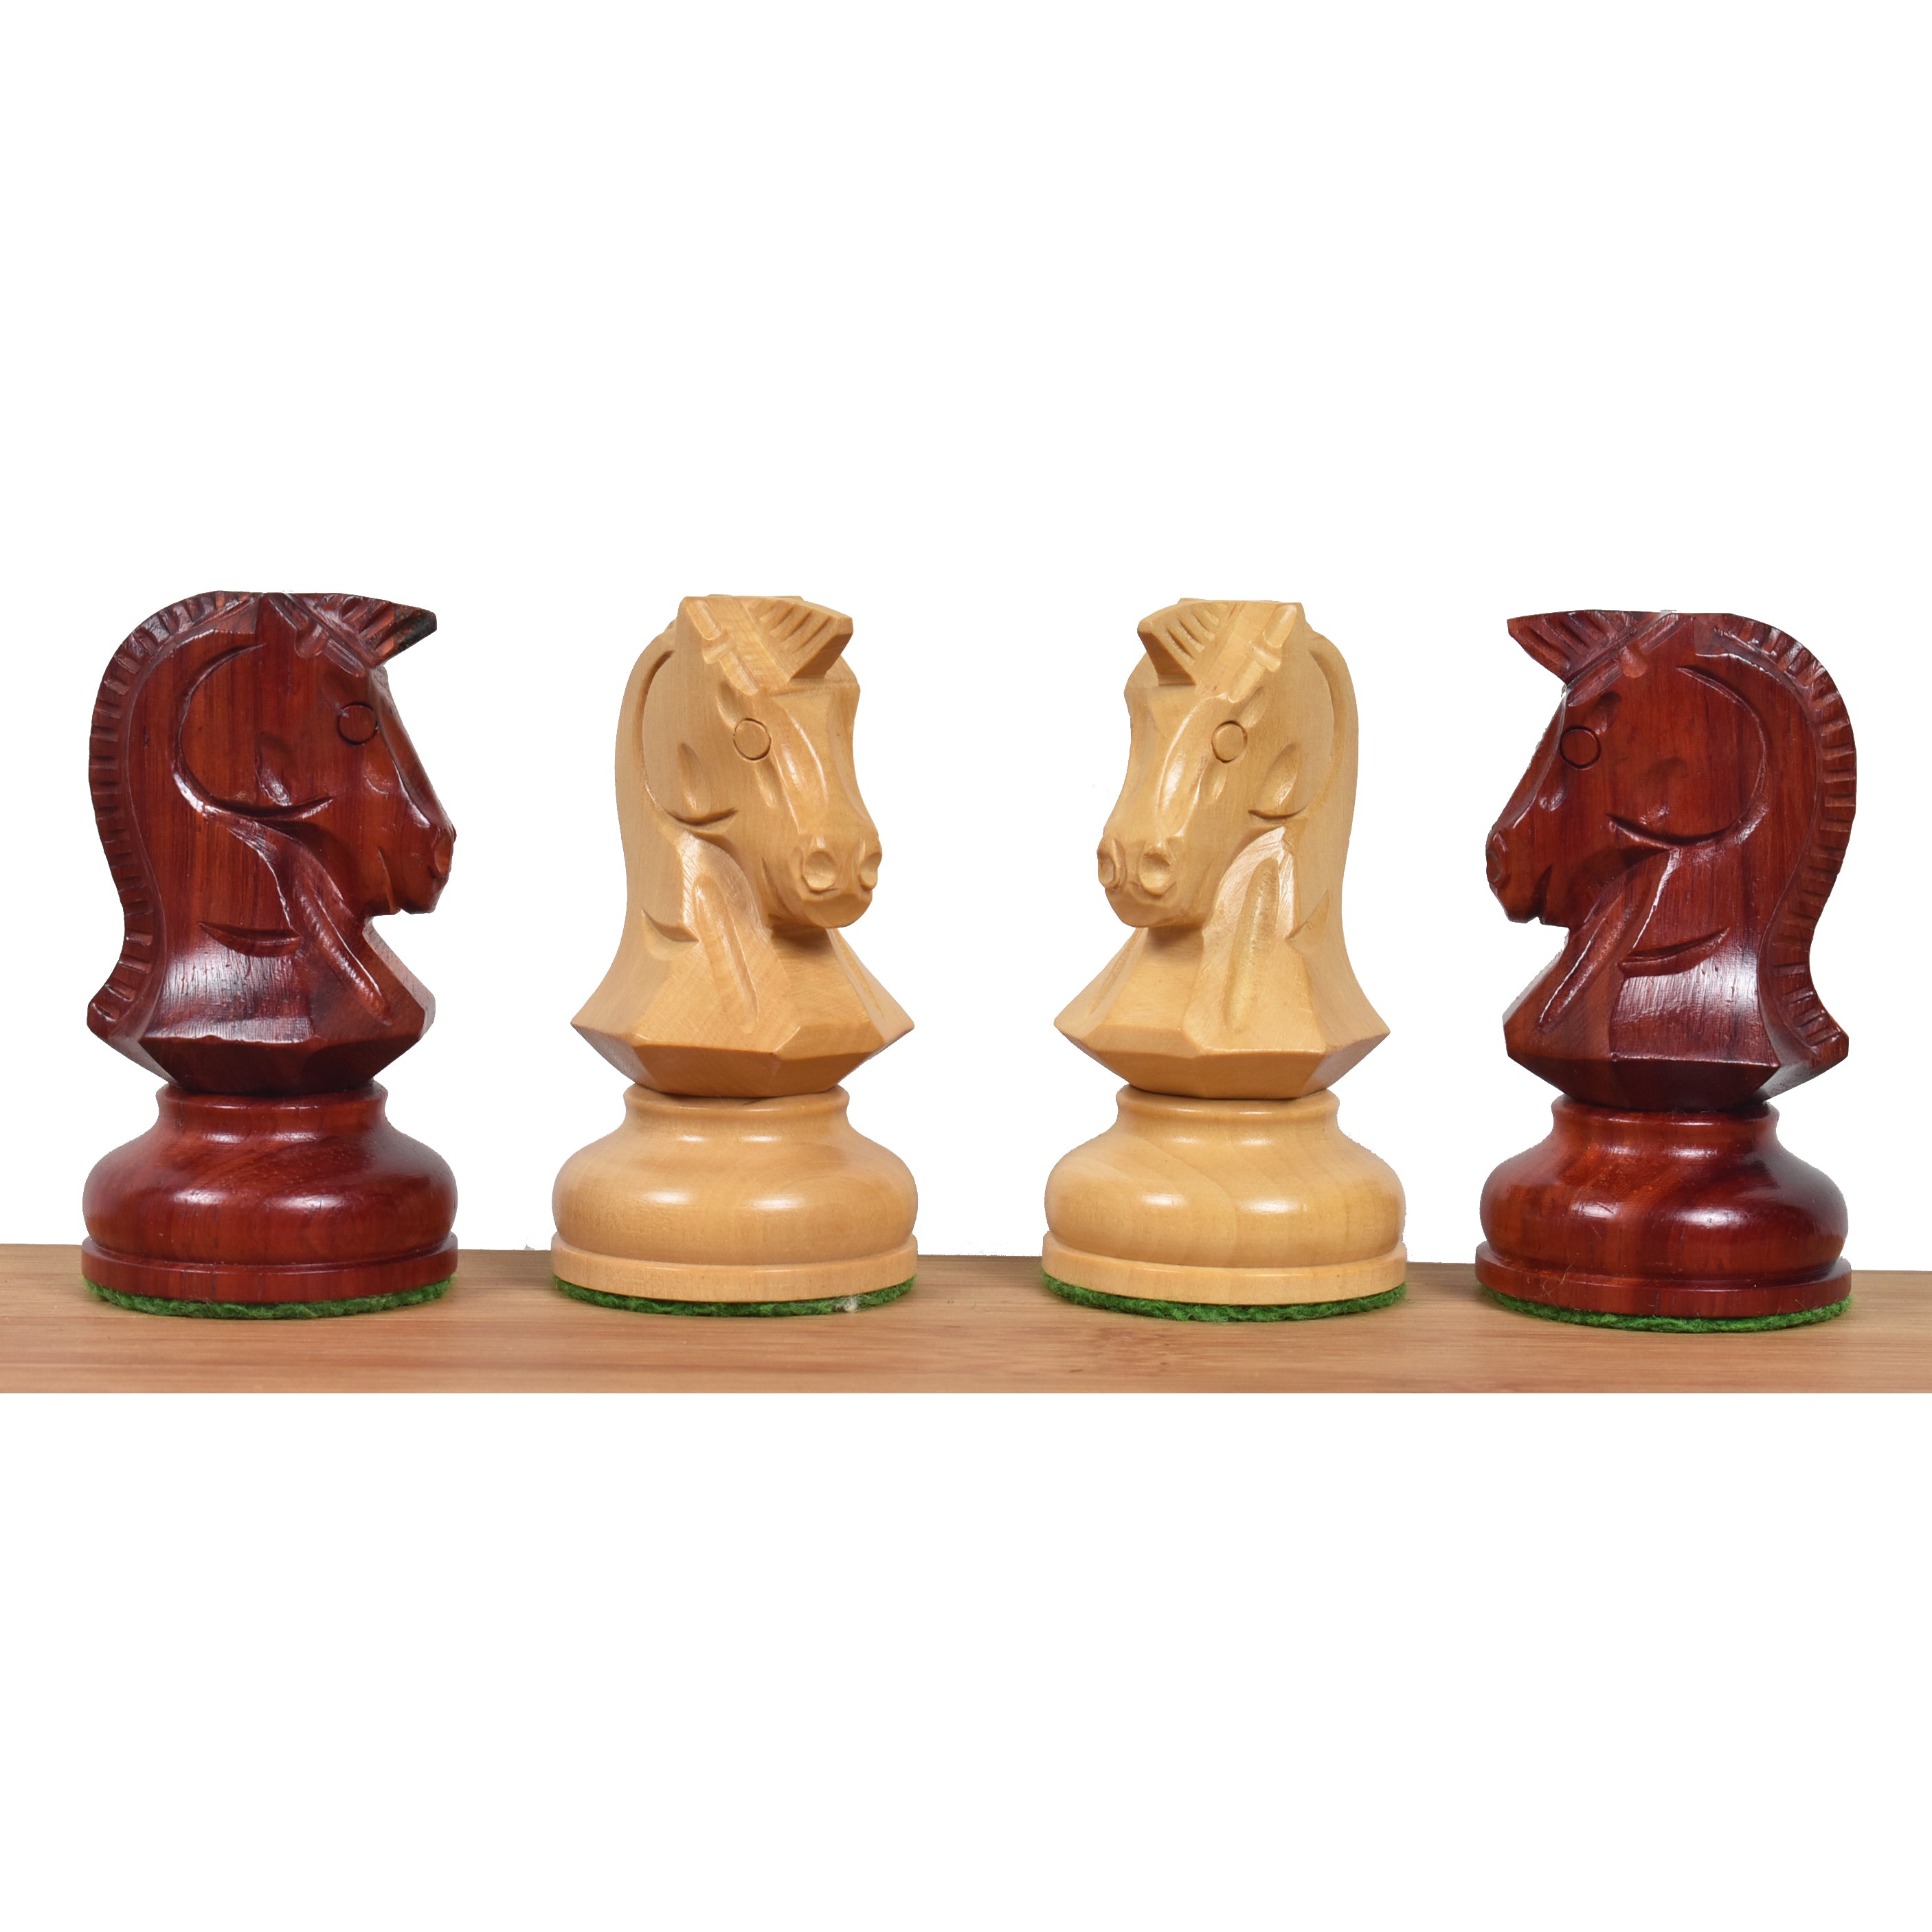 1970s' Dubrovnik Chess Pieces | Chess Pieces Only | Wood Chess Sets